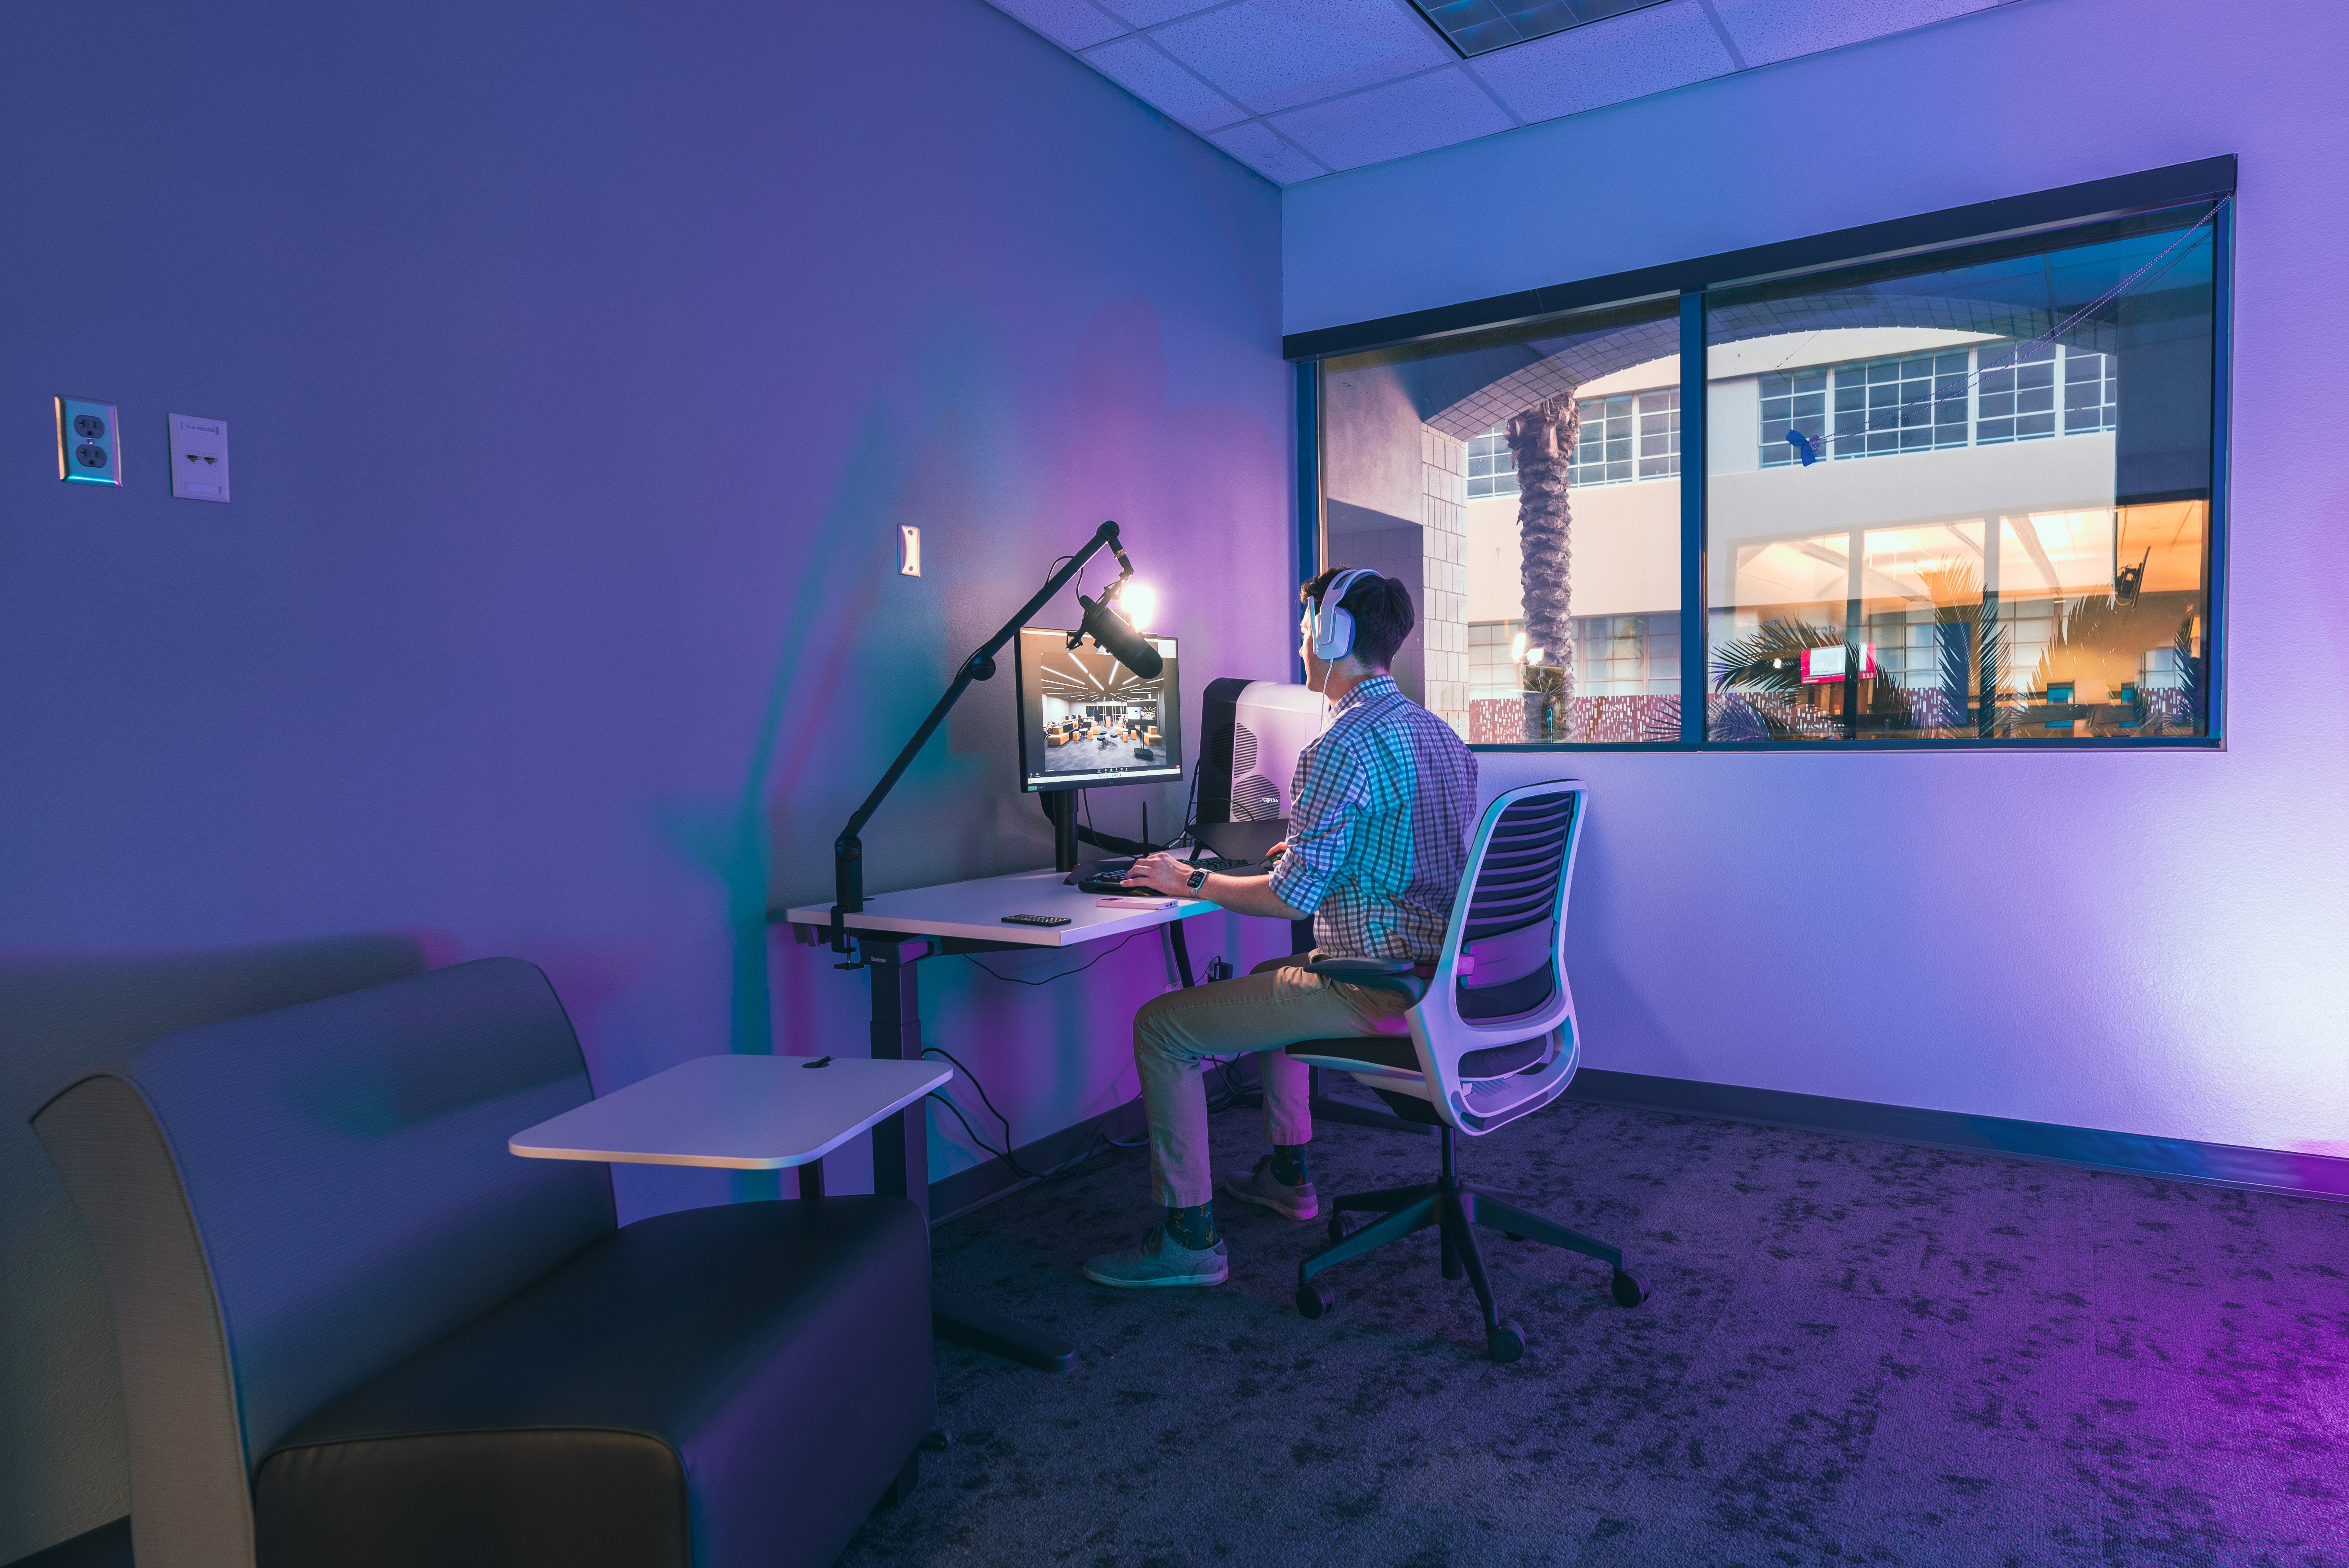 Student sitting at a desk in a room with purple lighting